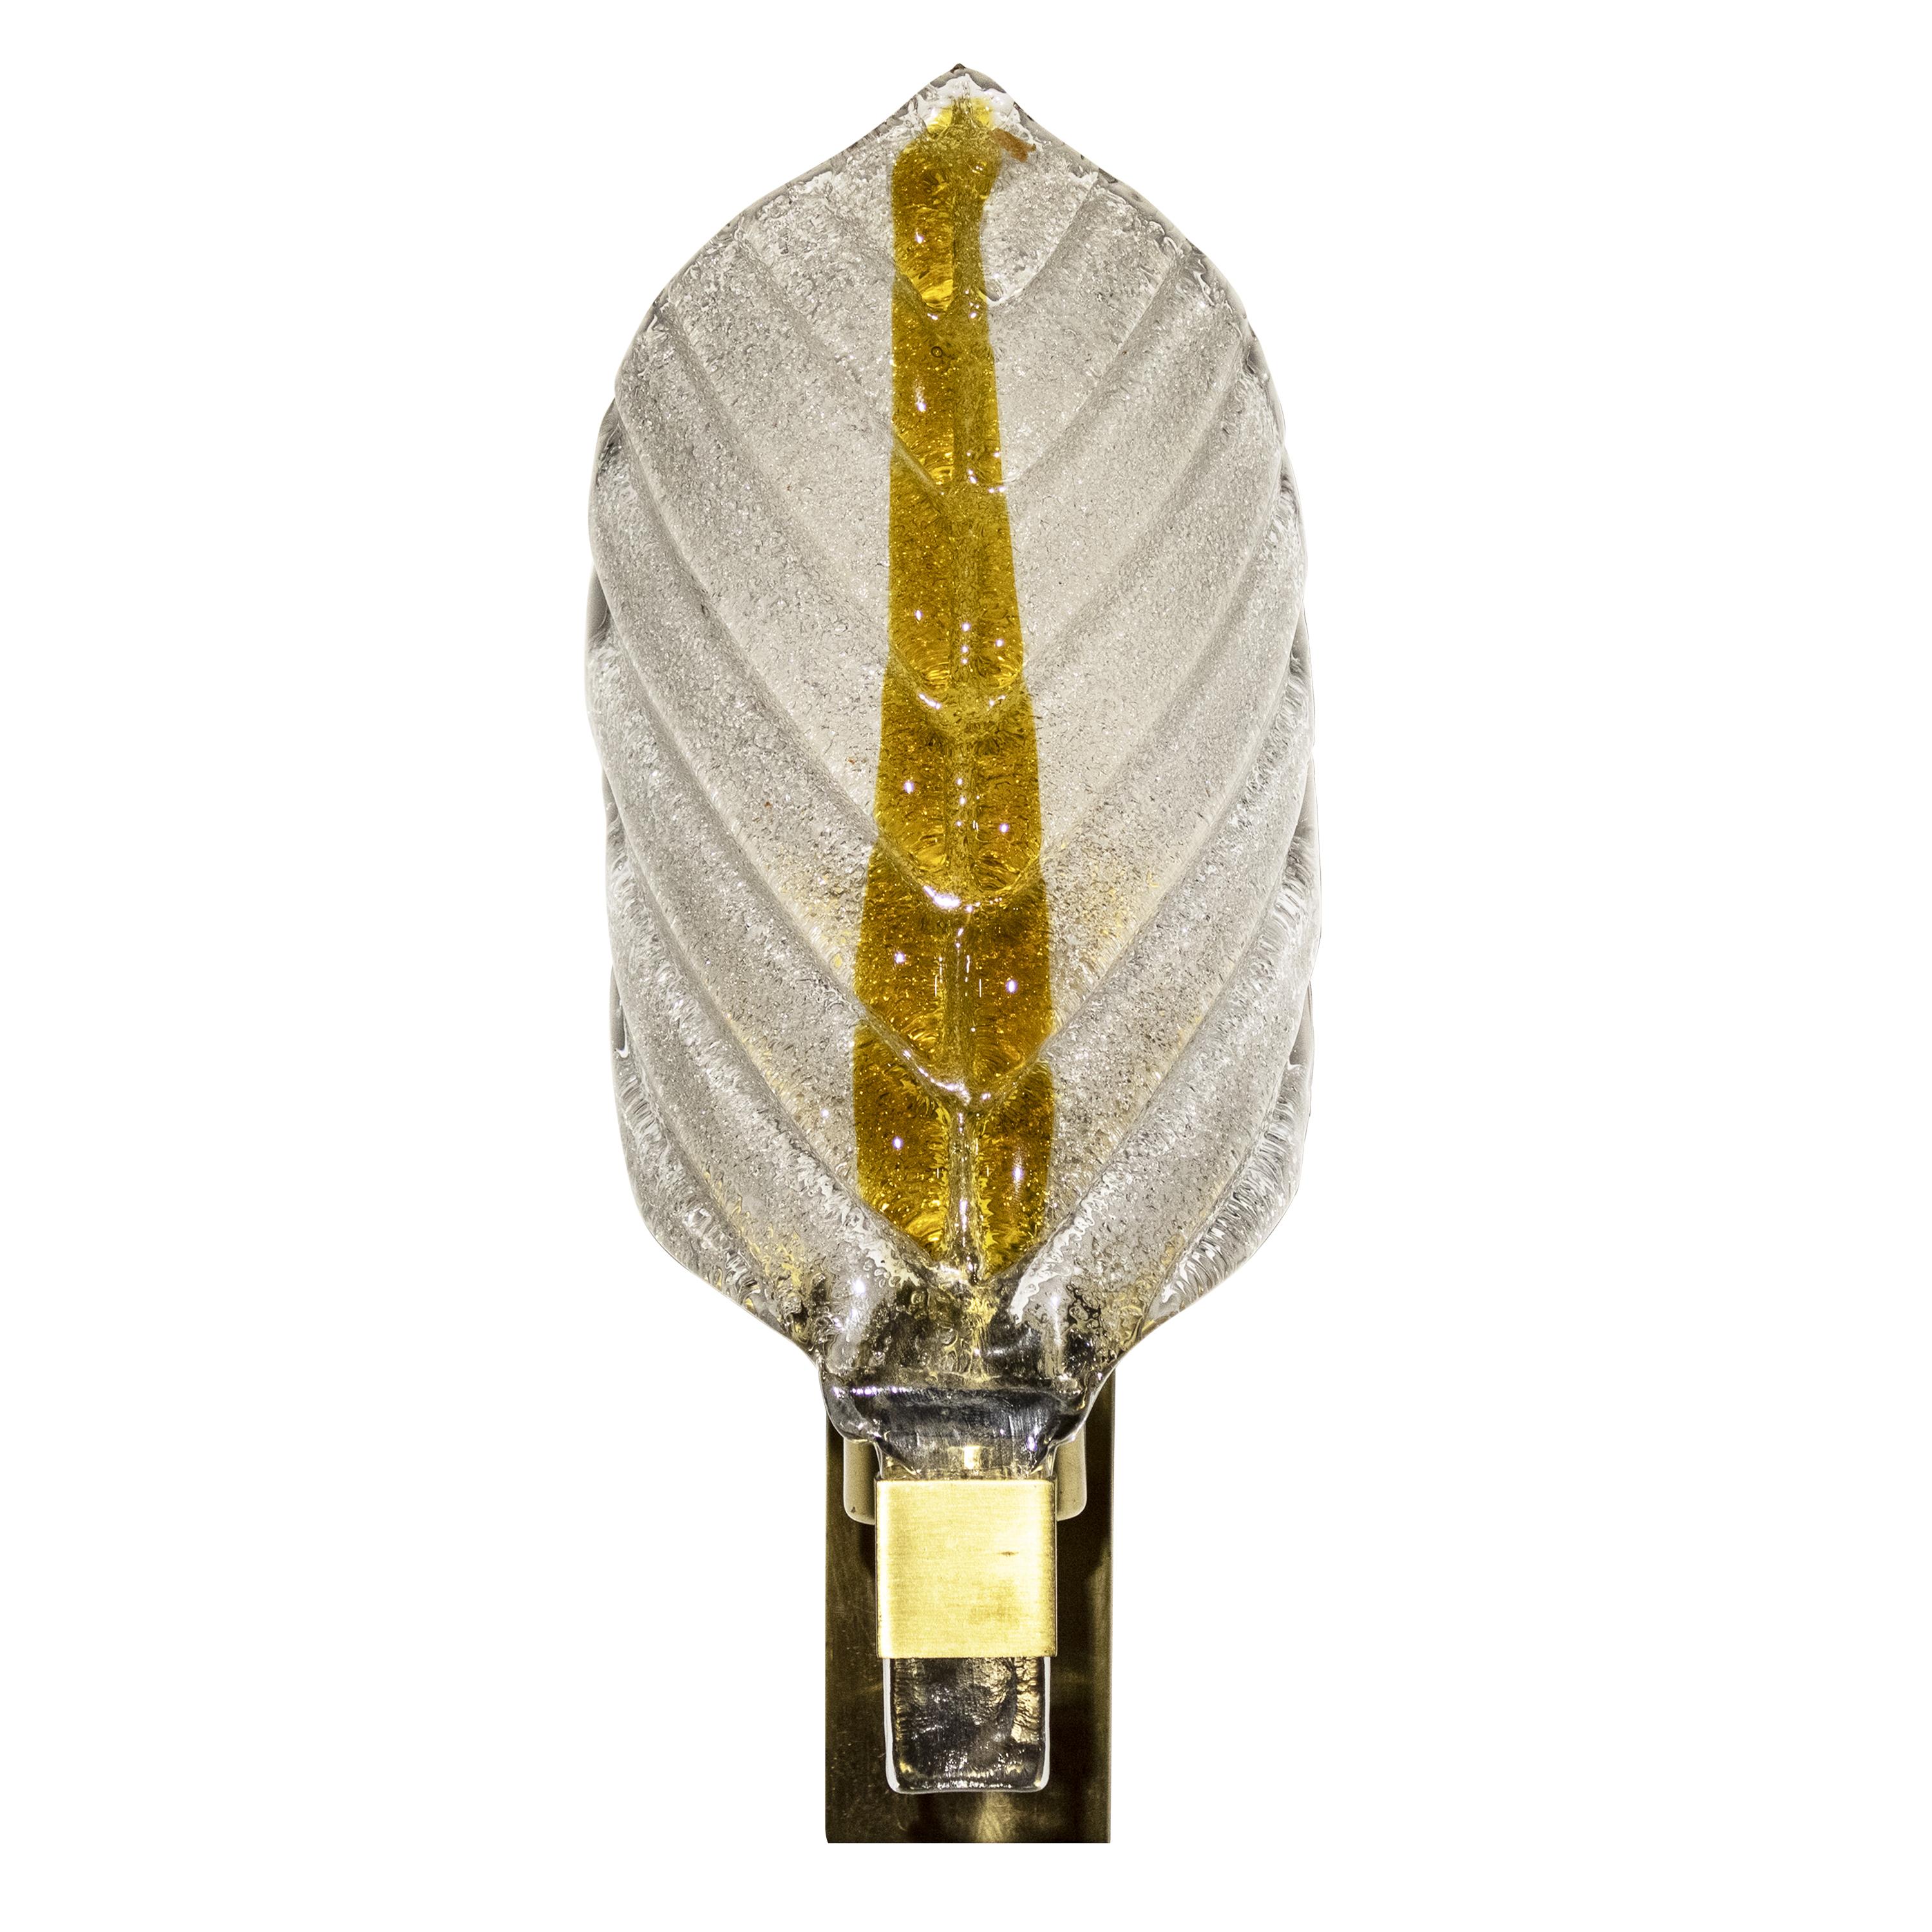 A sculptural hand-carved and hand-molded leaf-shaped Murano glass sconce with a rectangular brass structure.
The lamp consists of semi-transparent ice frost bicolor glass painted with an auburn line in the center. Detailed with vertical twisted